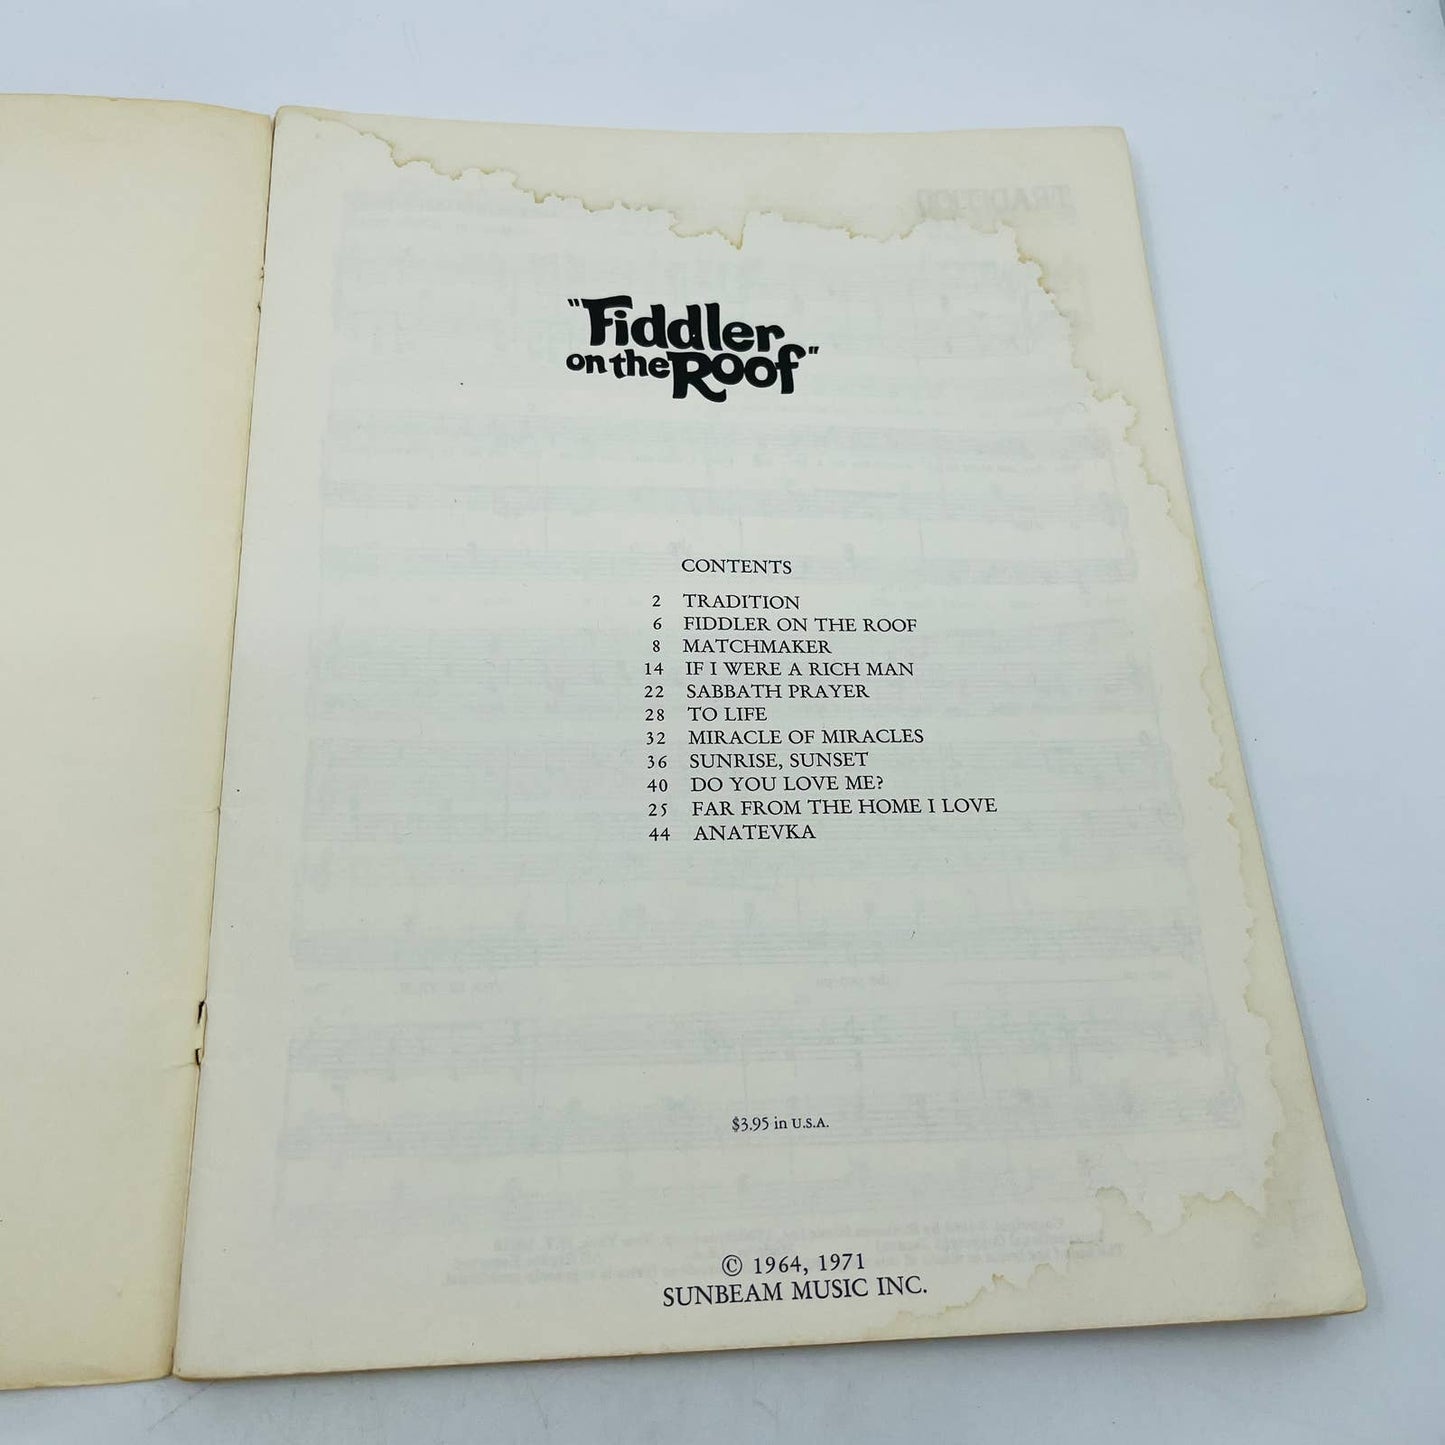 1971 Fiddler on the Roof Vocal Selection Book Norman Jewison BA4